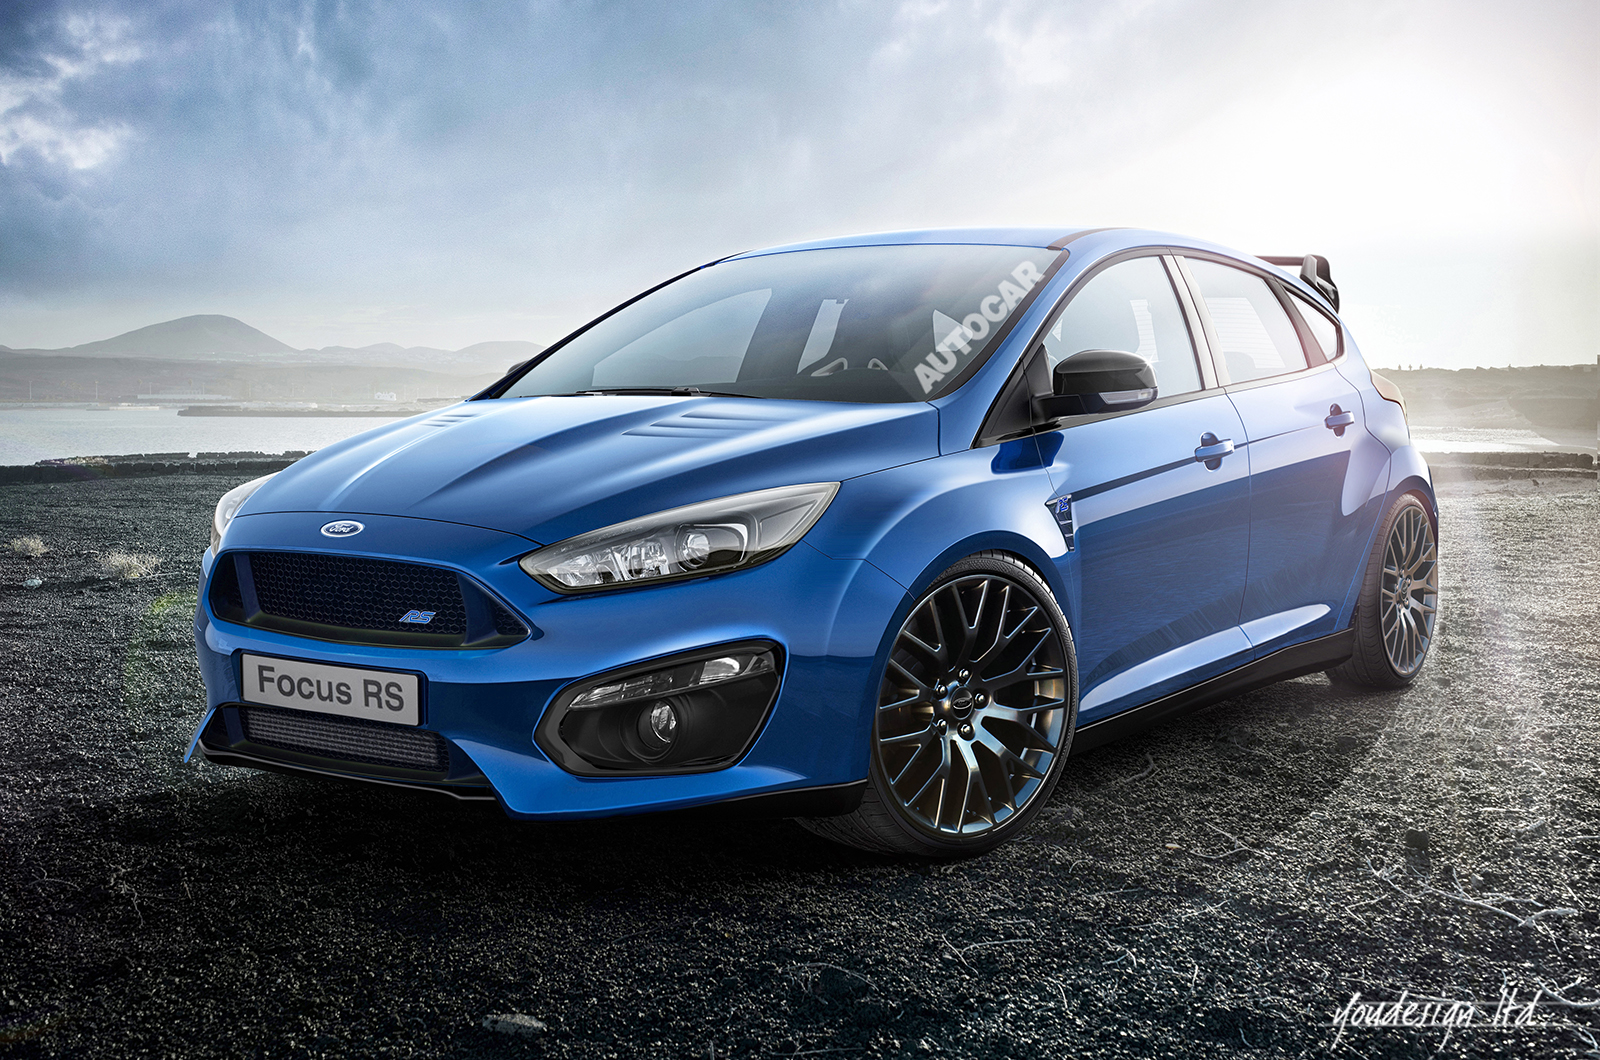 Third Generation Ford Focus Rs Powered By Litre Ecoboost Engine